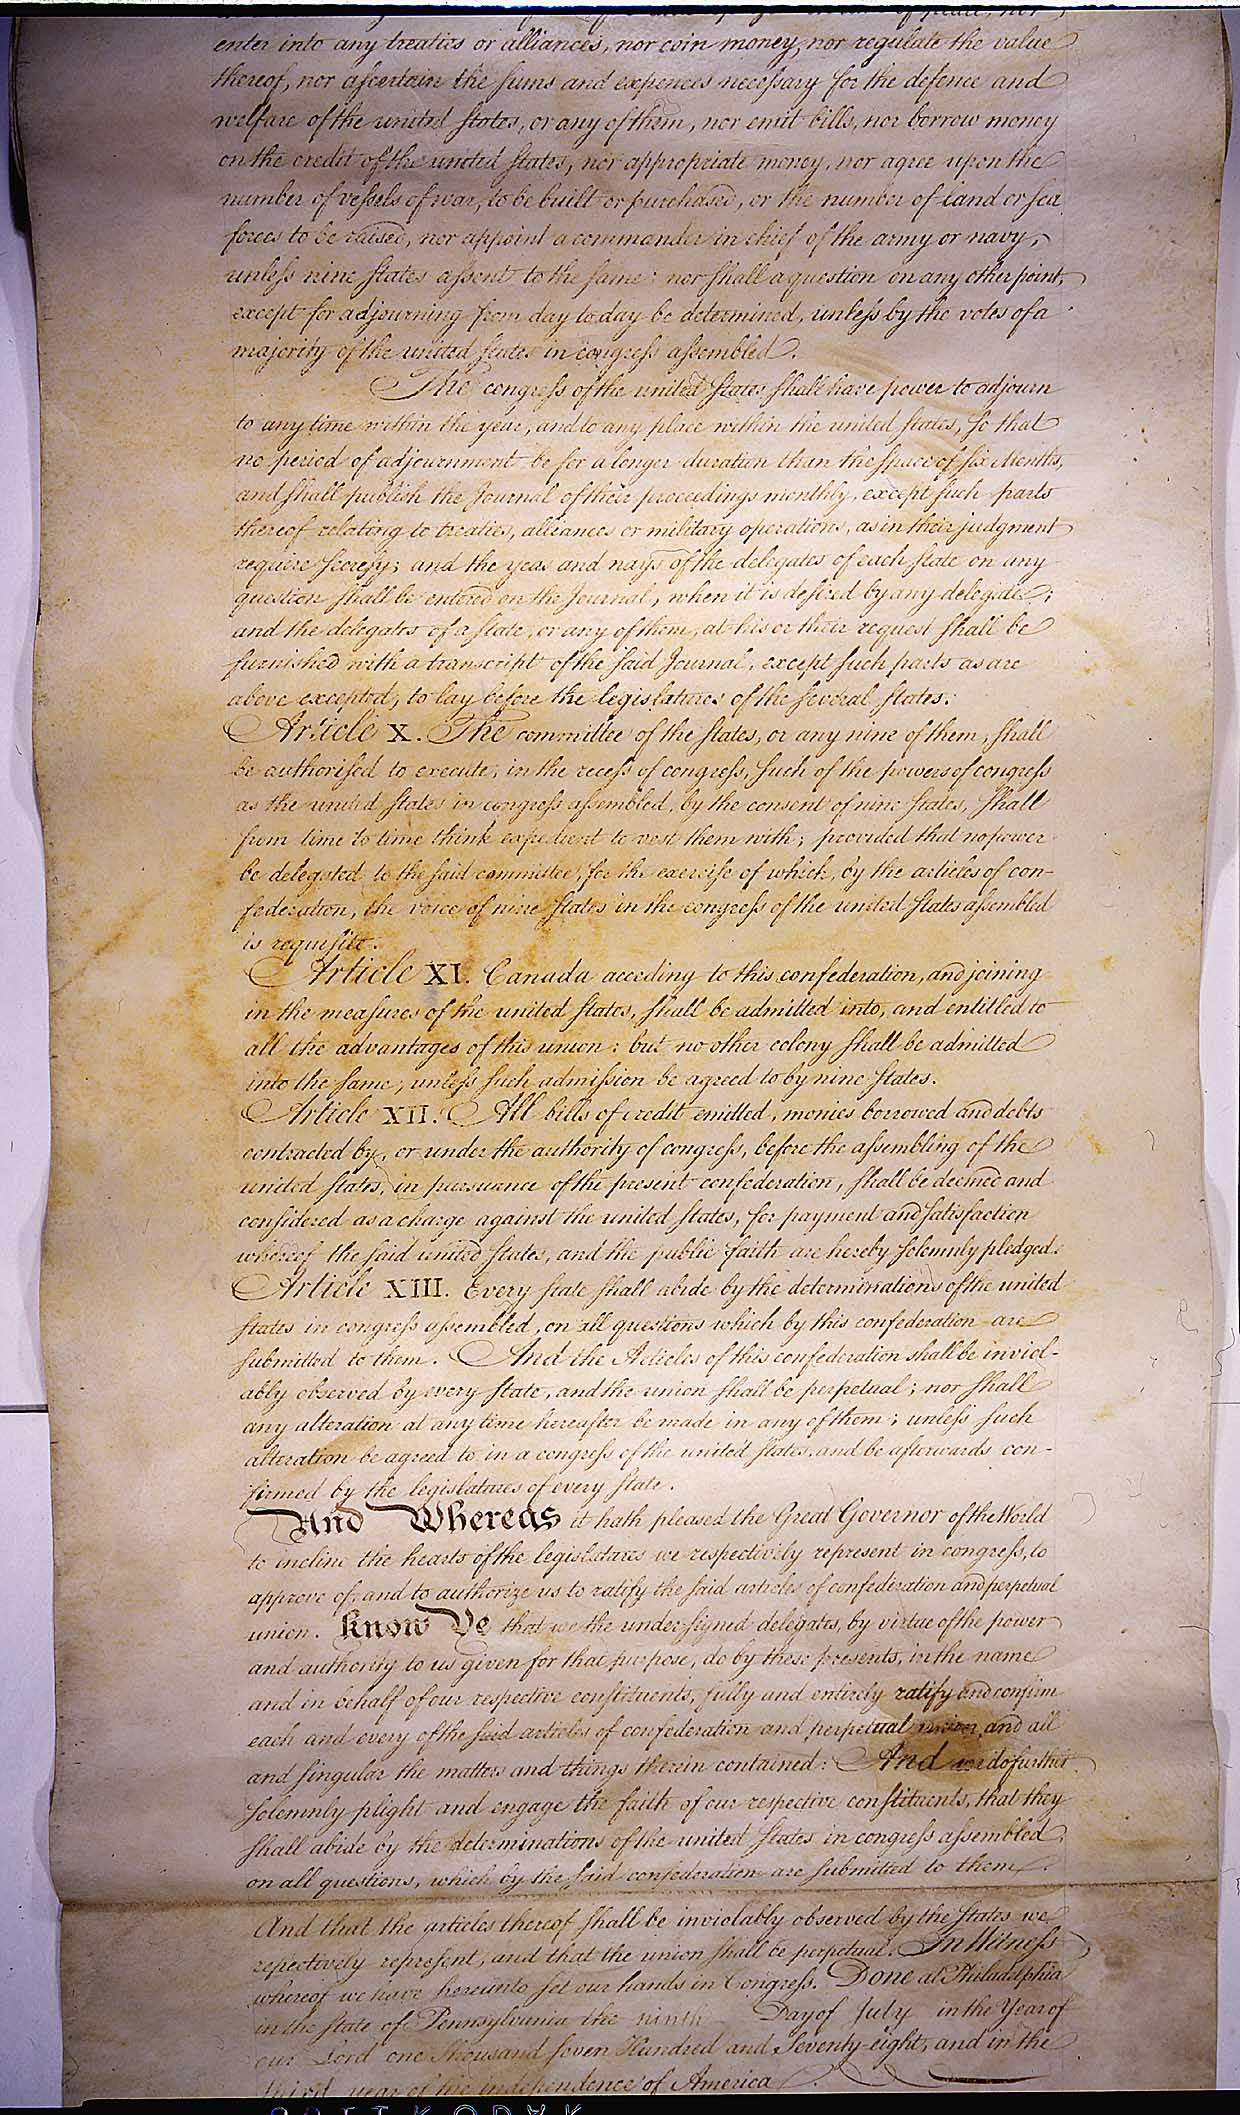 Articles of Confederation (Page 3)